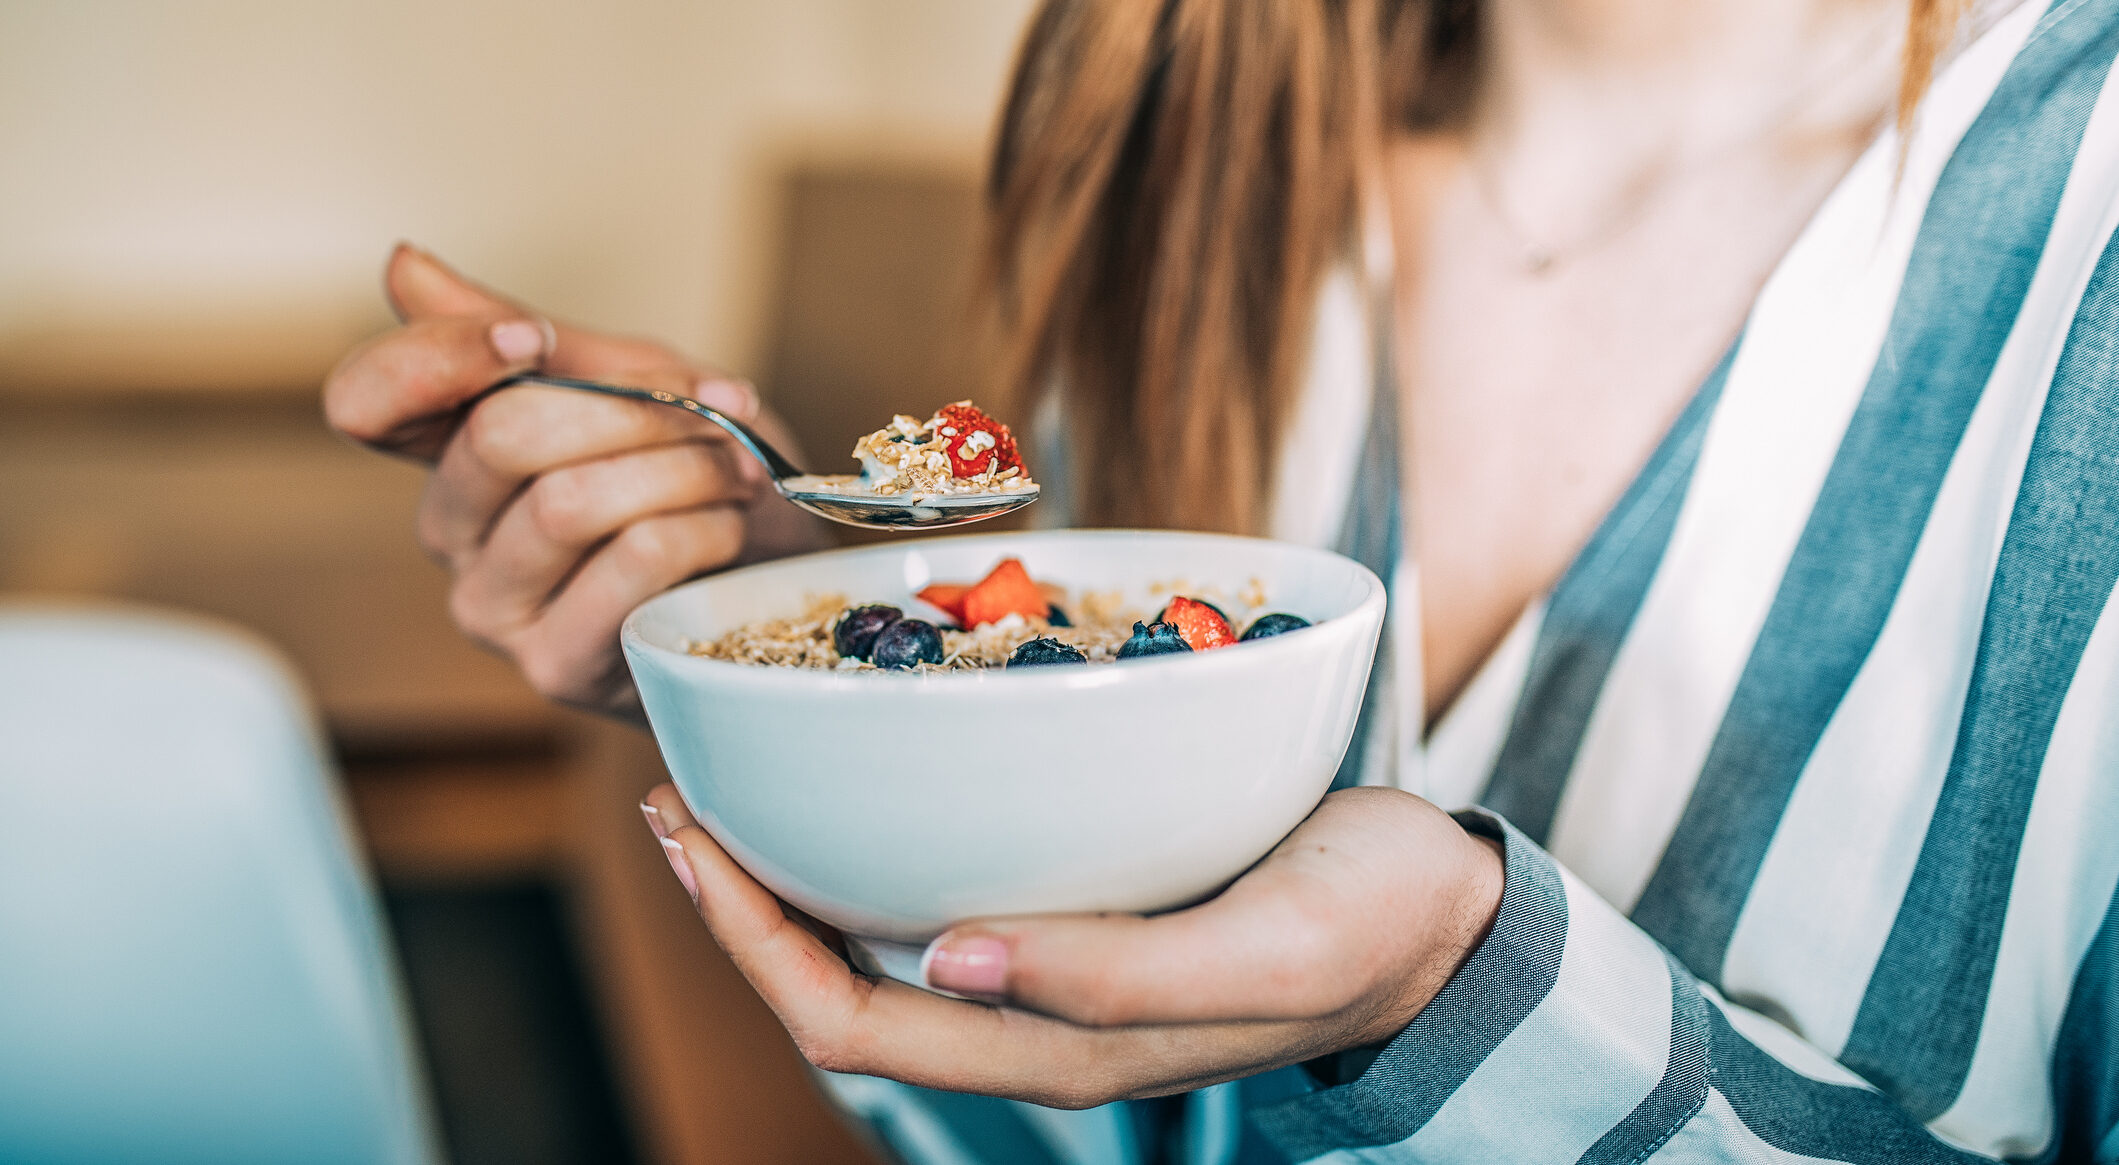 A cropped photo of a woman, shown close up, eating a bowl of oat and fruit cereal for breakfast.